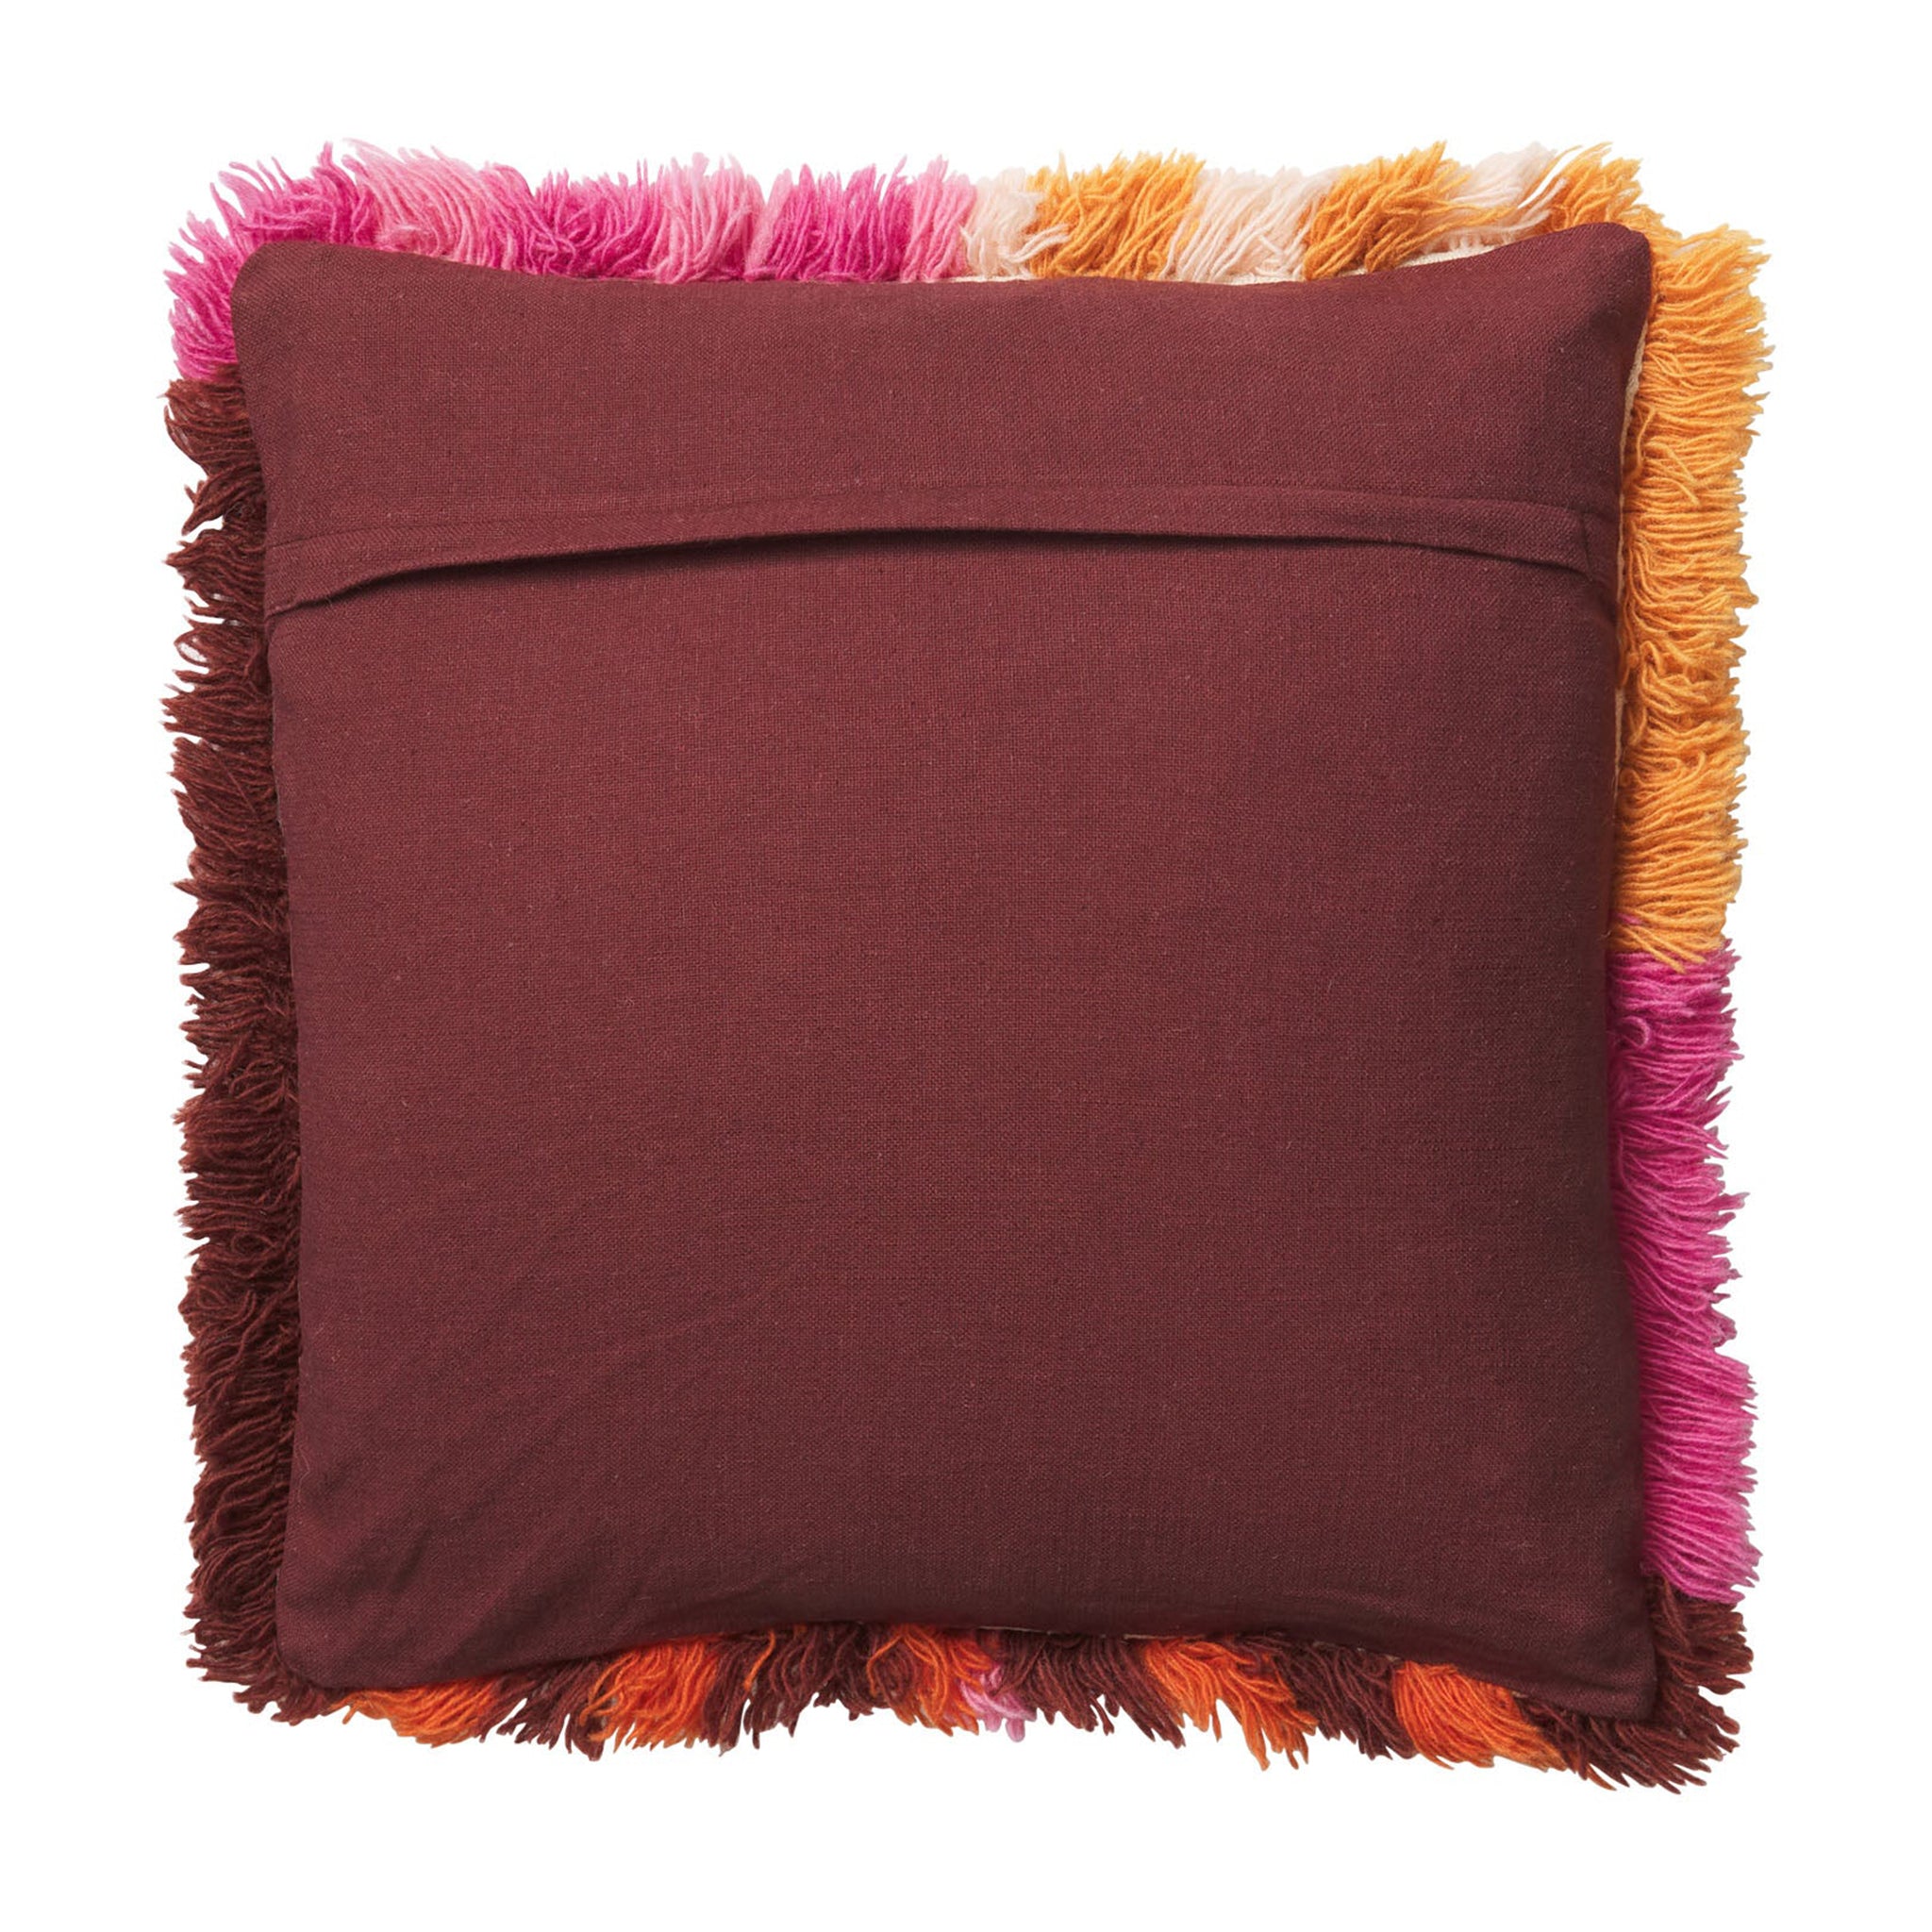 The back of the pillow that features a slip for the insert along with a patternless brown colored fabric. 